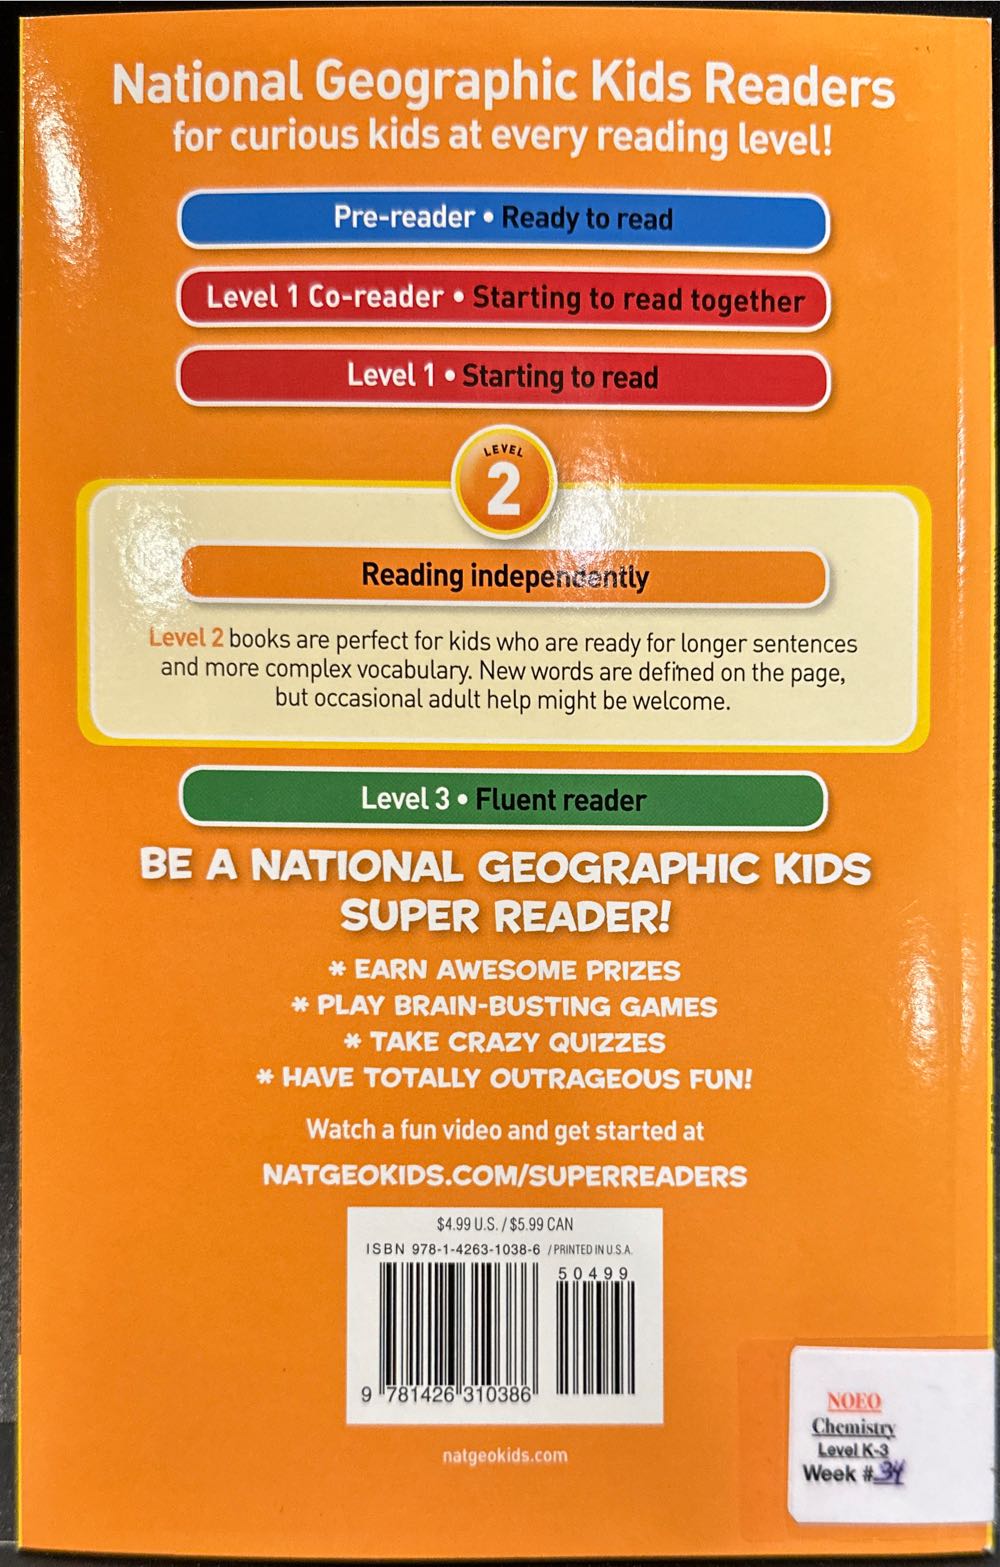 National Geographic Kids- Rocks and Minerals - Kathleen Weidner Zoehfeld (National Geographic Books - Paperback) book collectible [Barcode 9781426310386] - Main Image 3